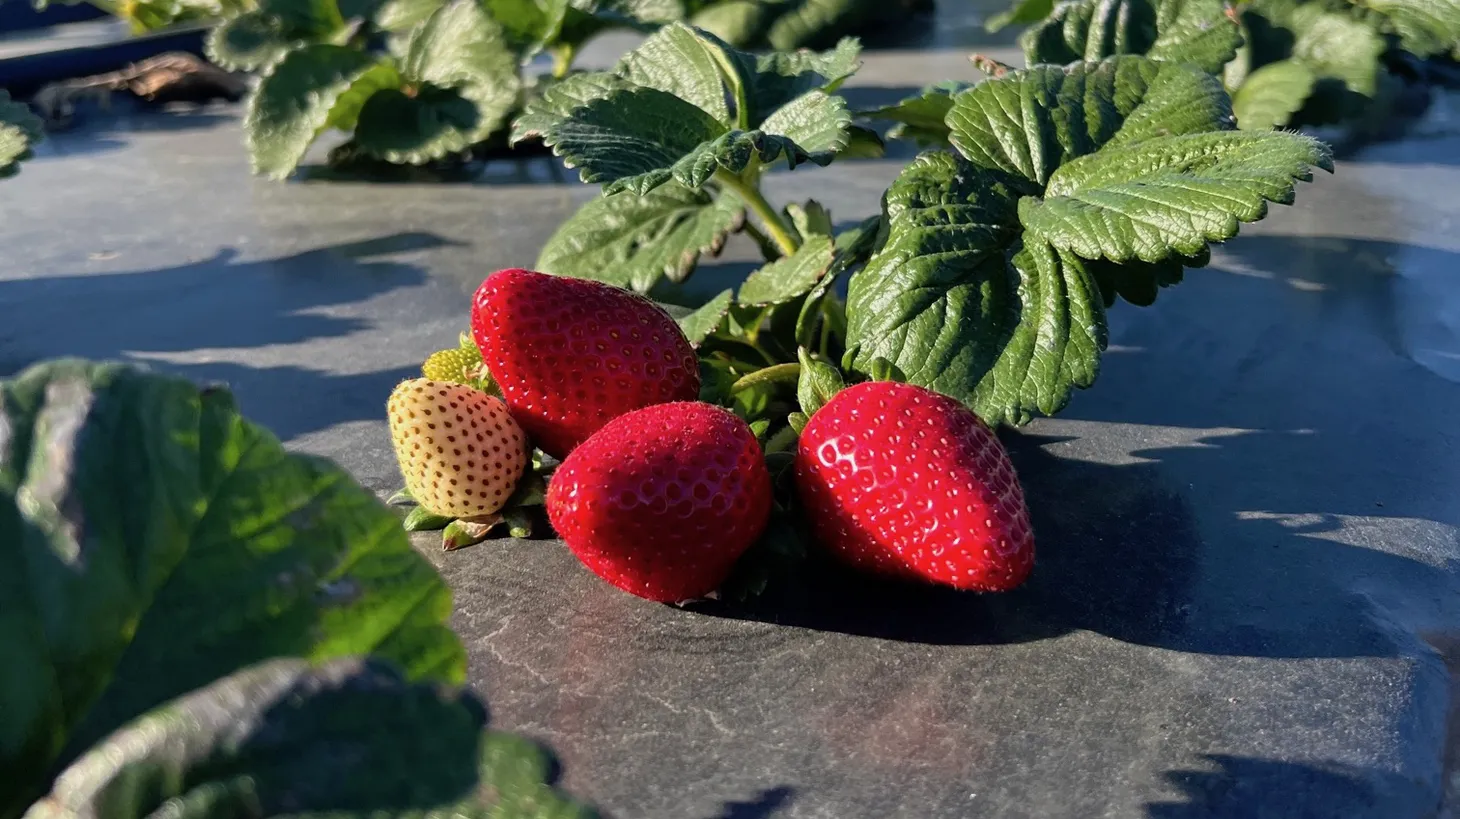 Julia Tamai says the rain at the farm in Oxnard has been so heavy, some of the fruit has been lost to the weather and your strawberries may be pitted by hail.